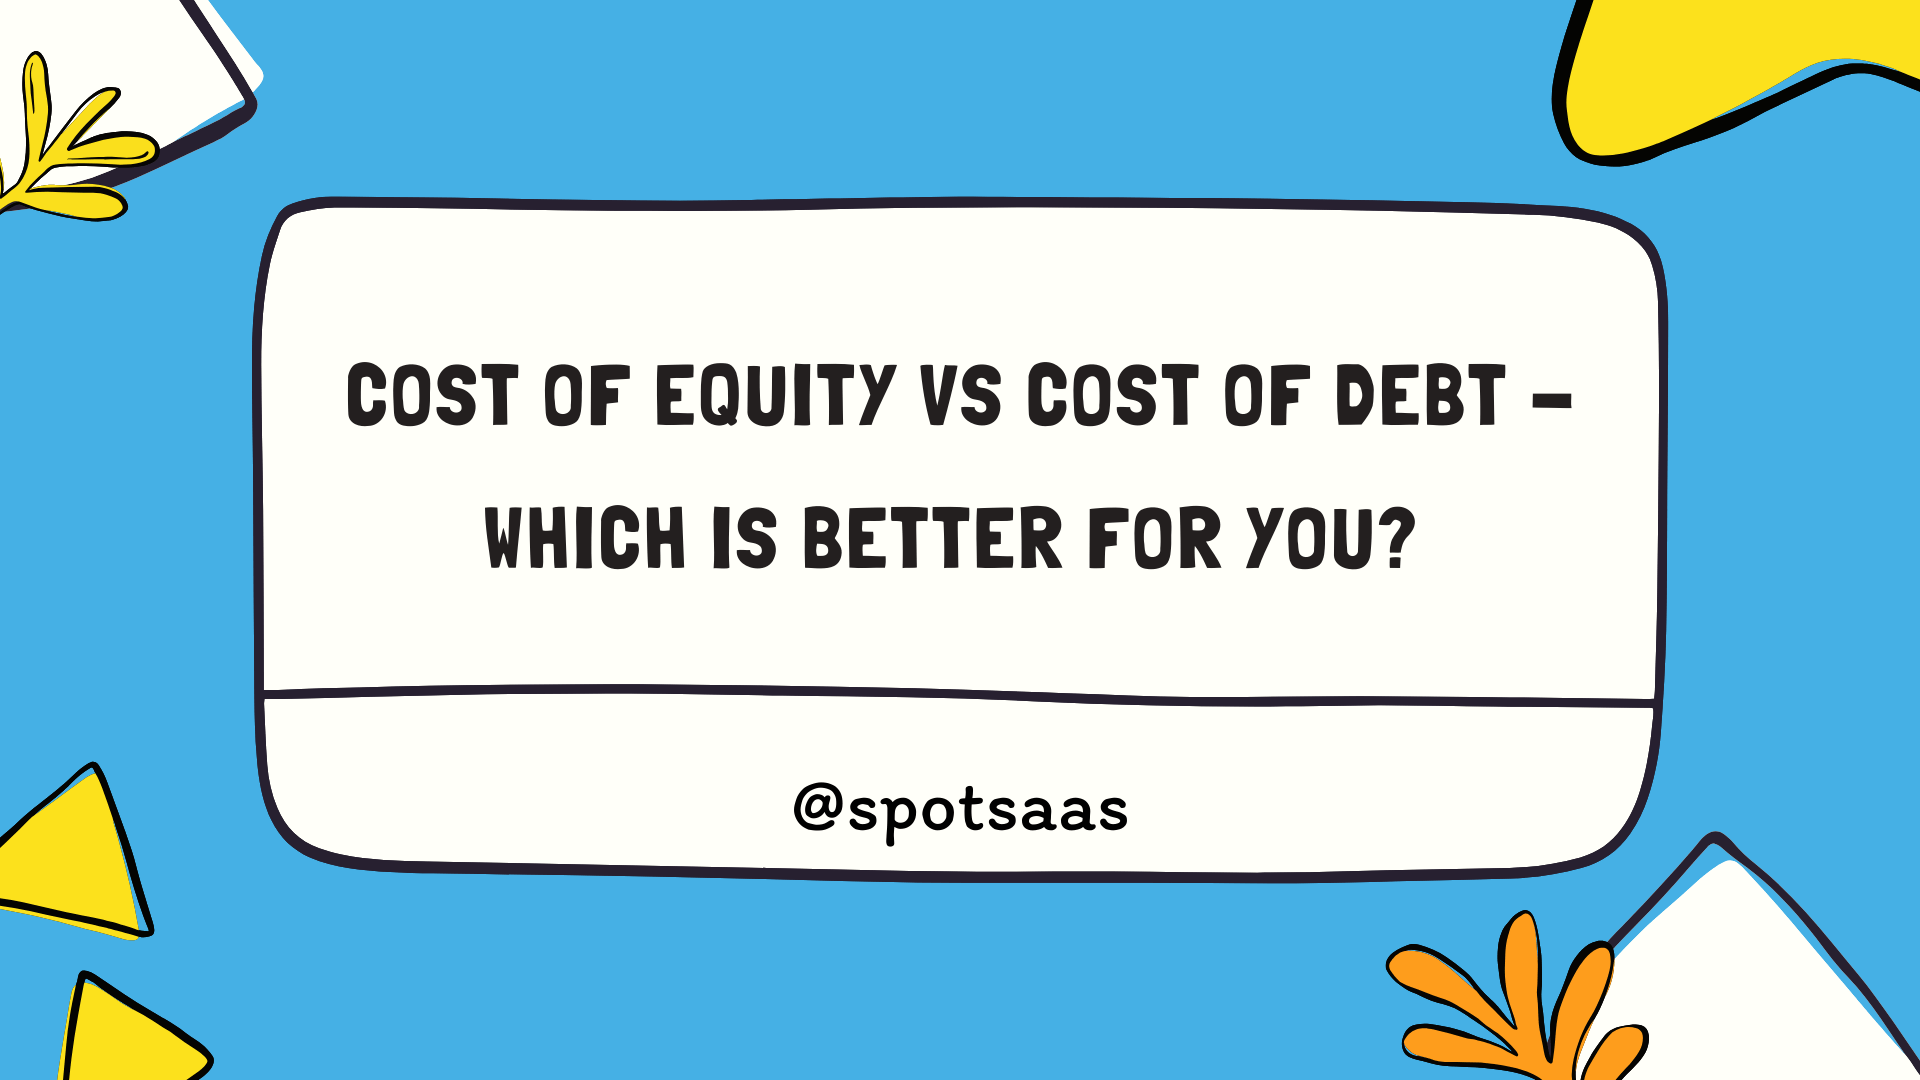 Cost of Equity vs Cost of Debt - Which is better for you? (